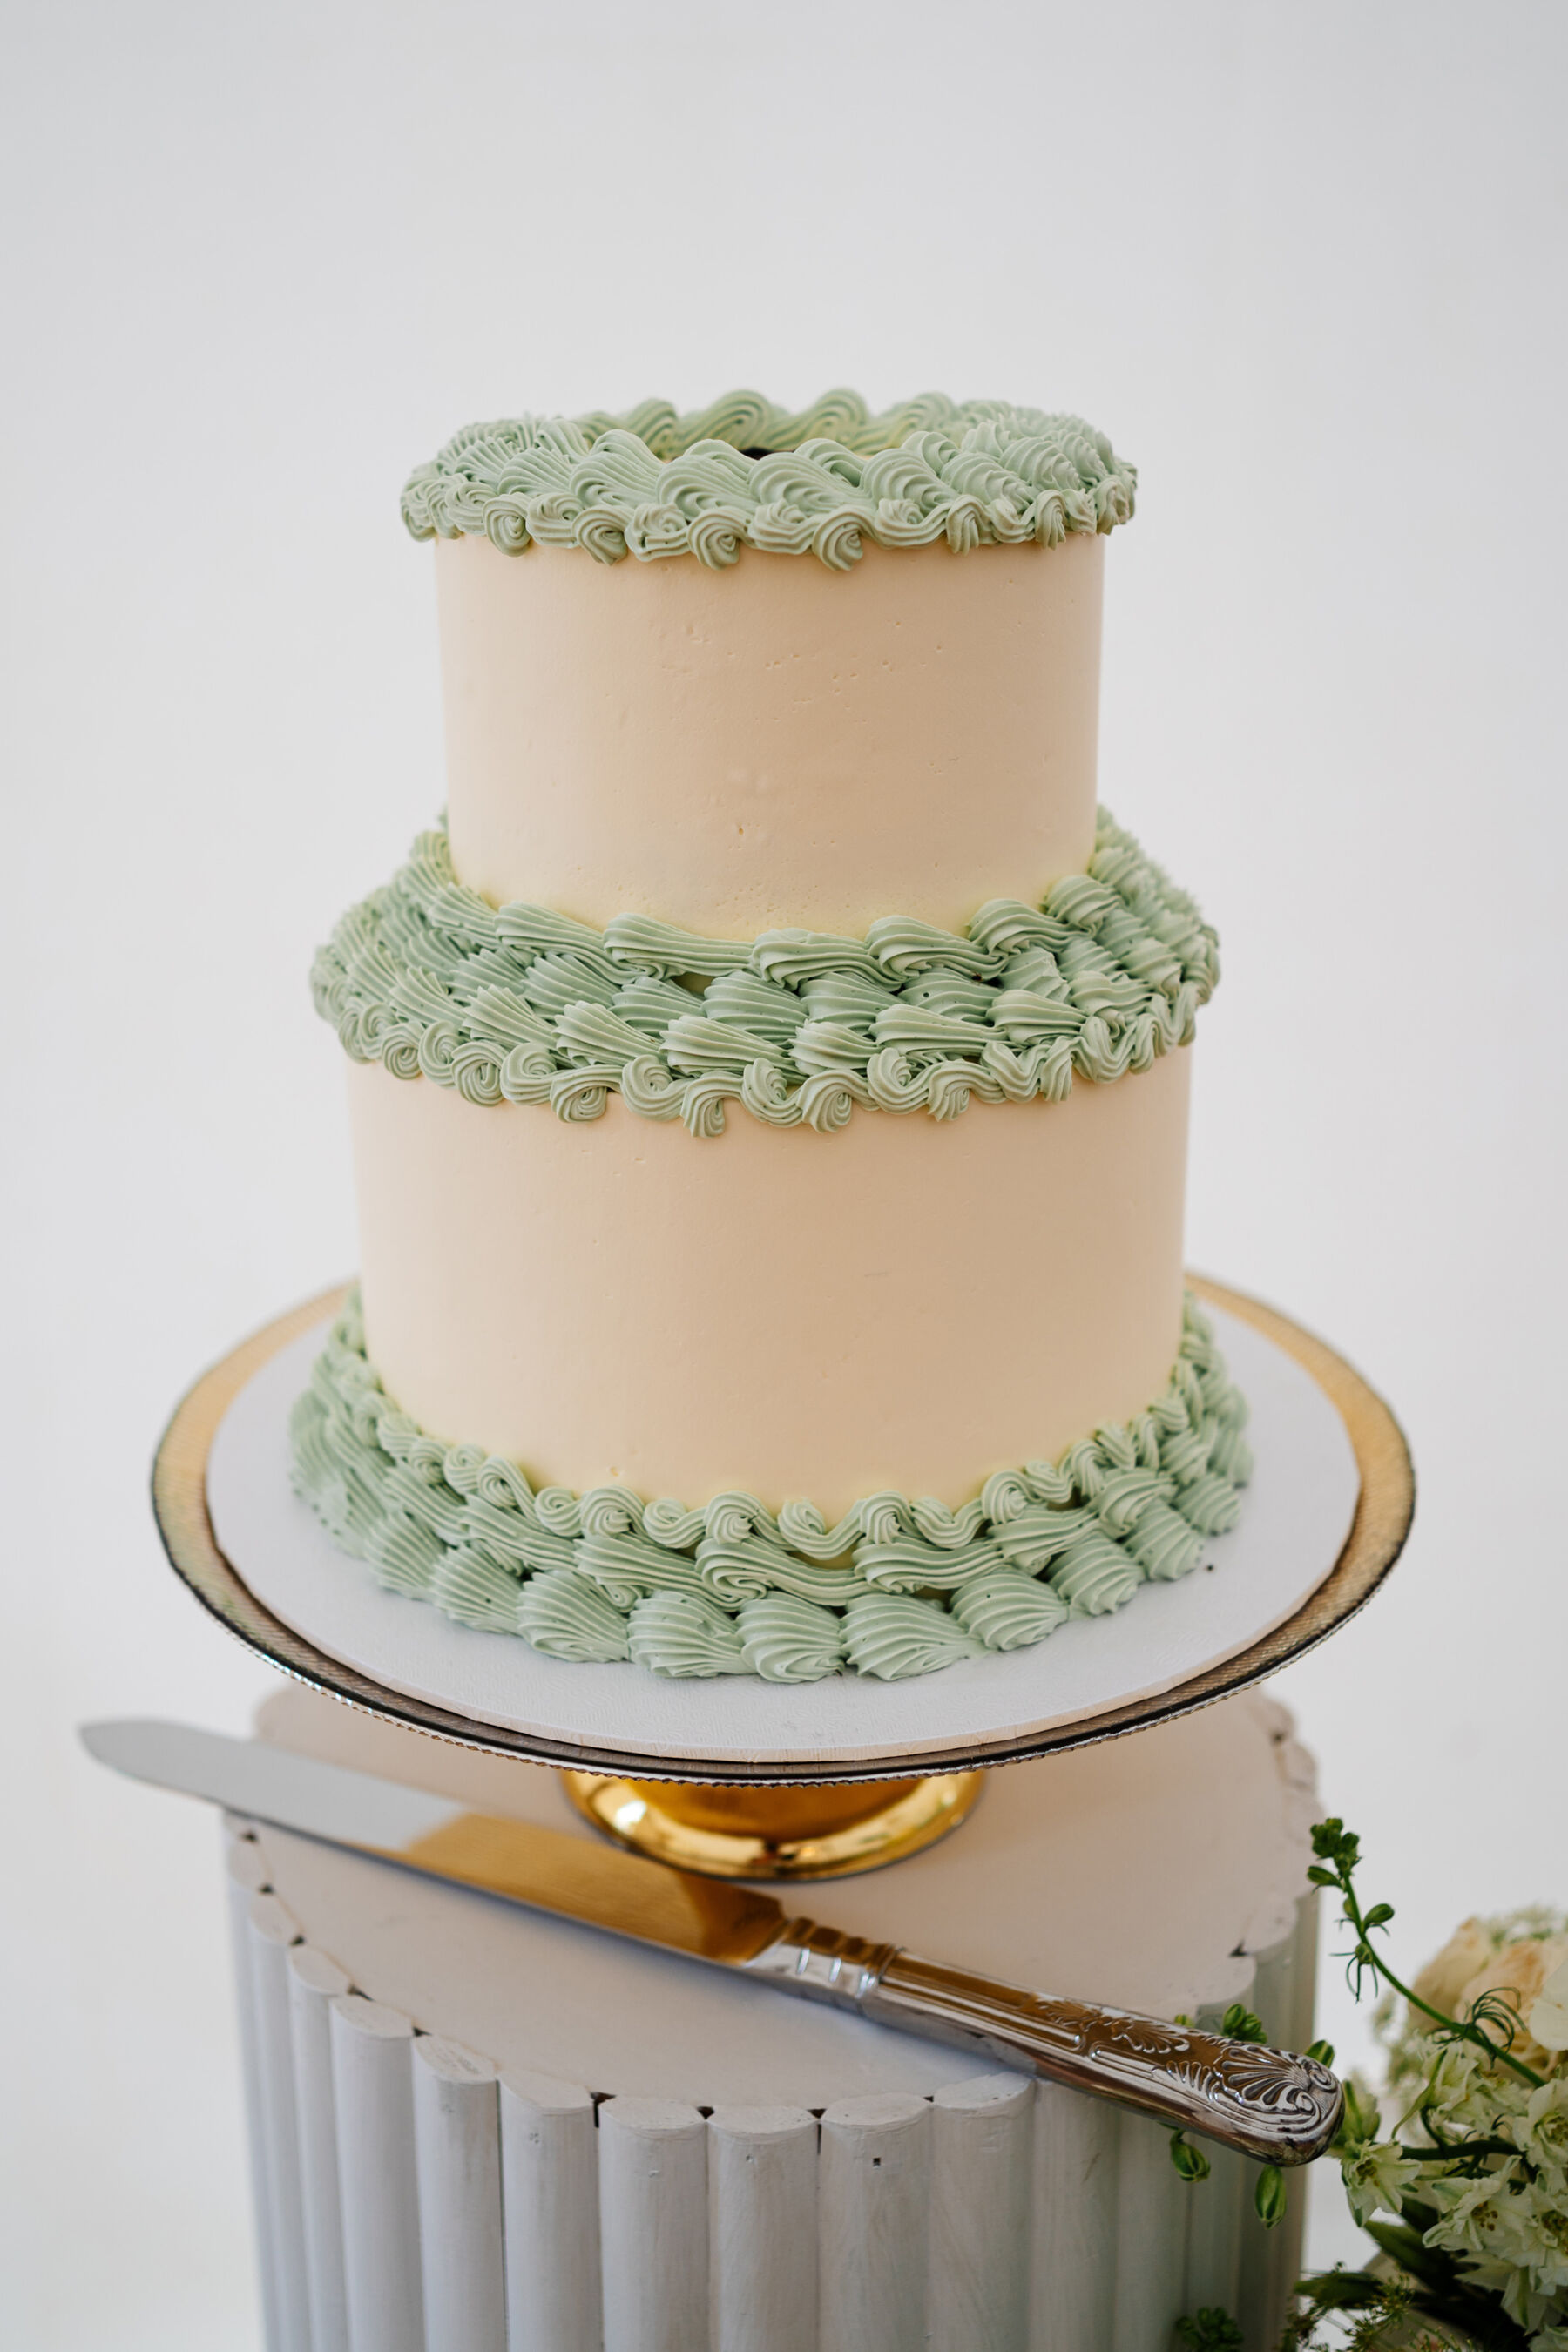 Simple 2 tier wedding cake with pale green frilly icing at the bases.